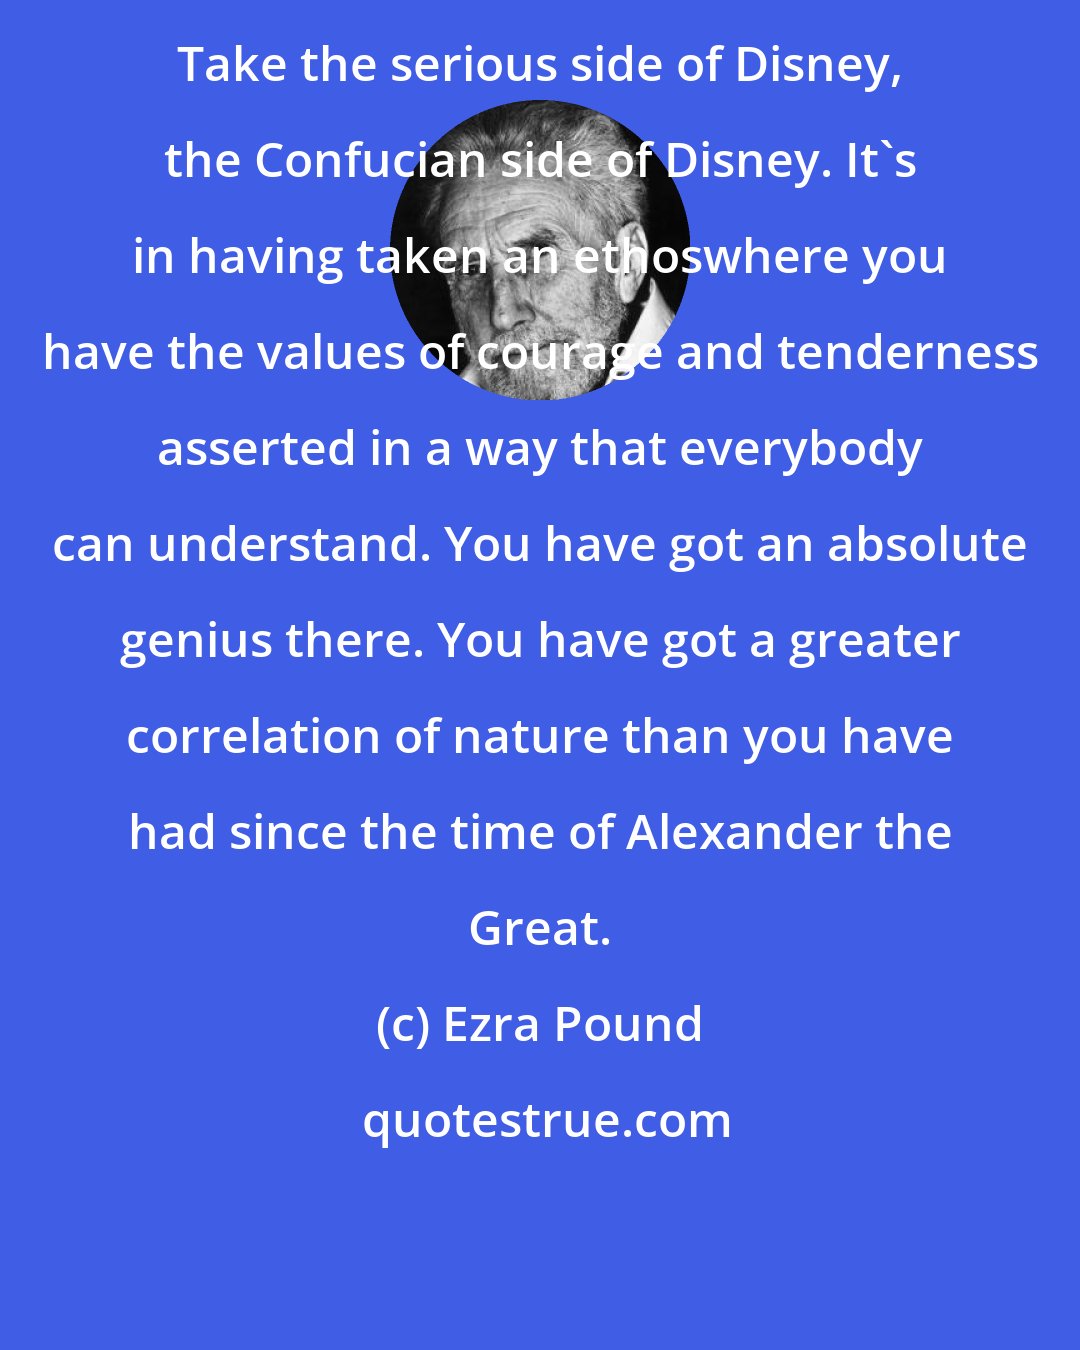 Ezra Pound: Take the serious side of Disney, the Confucian side of Disney. It's in having taken an ethoswhere you have the values of courage and tenderness asserted in a way that everybody can understand. You have got an absolute genius there. You have got a greater correlation of nature than you have had since the time of Alexander the Great.